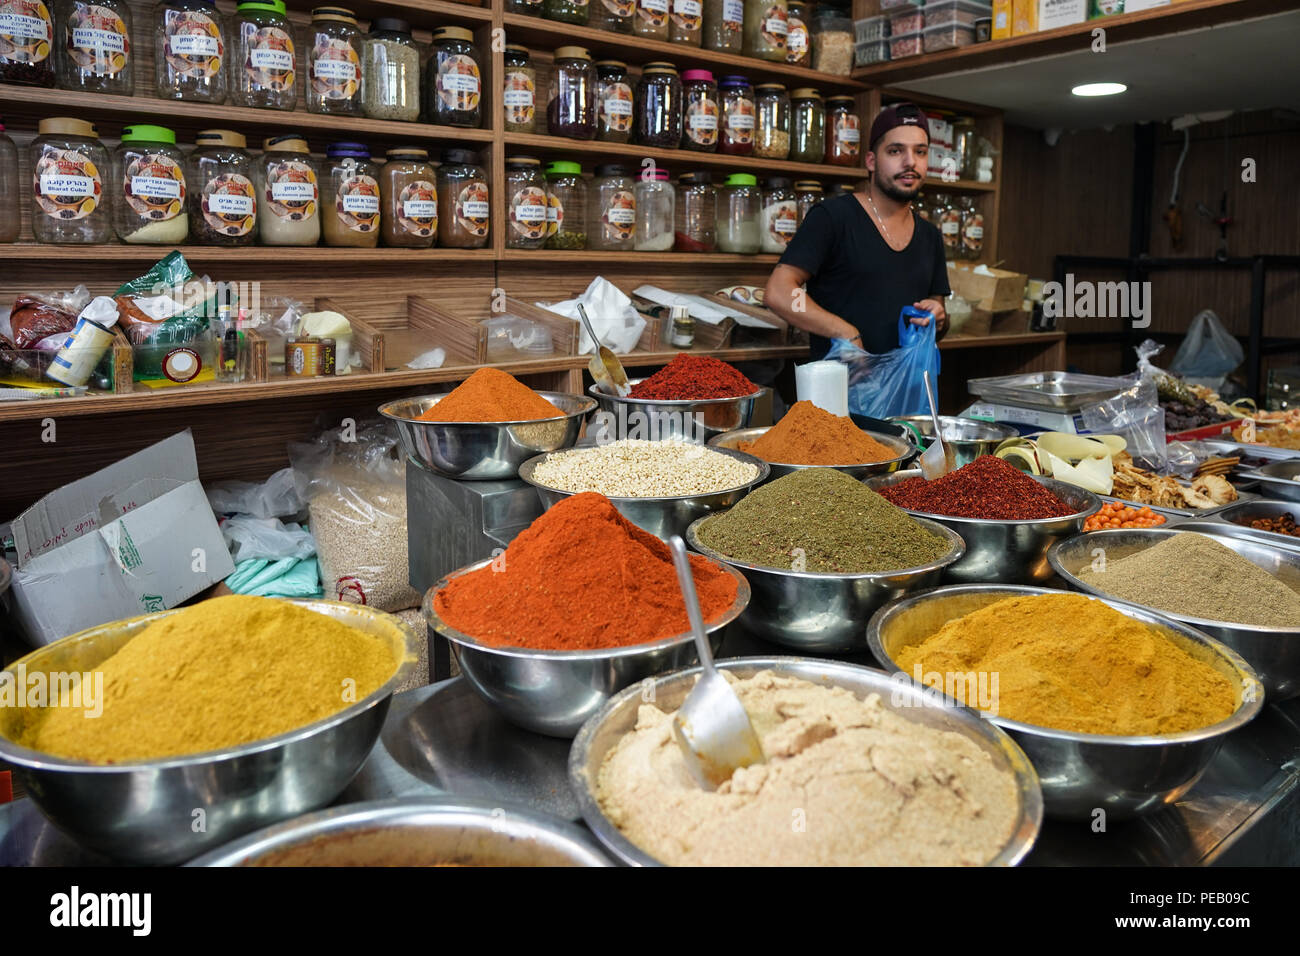 A spice seller in Machane Yehuda market in Jewish west Jerusalem. From a series of travel photos taken in Jerusalem and nearby areas. Photo date: Mond Stock Photo